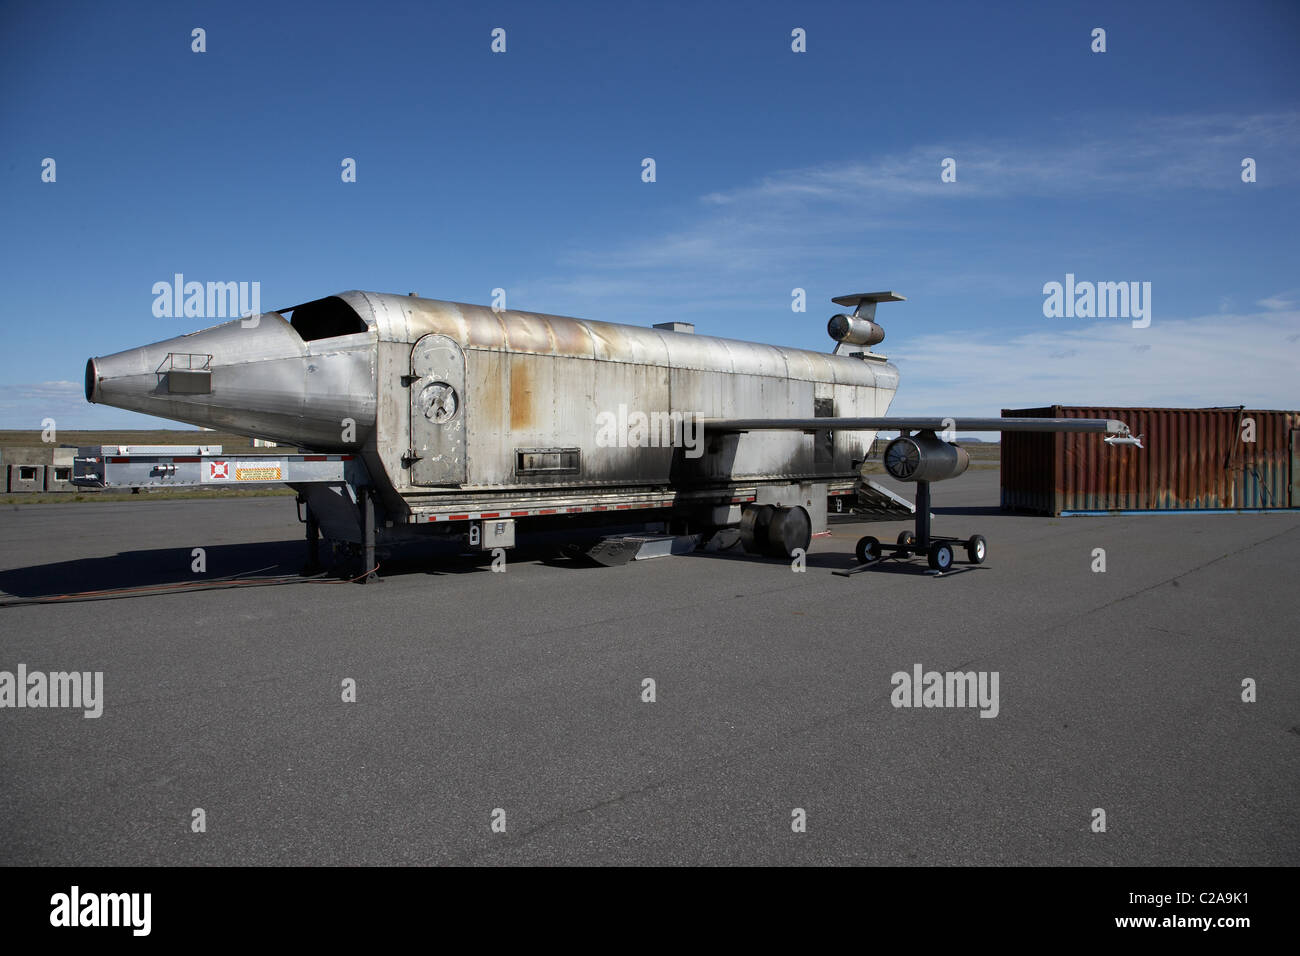 Scrap plane use for fire drills at Keflavik Airport, Iceland Stock Photo